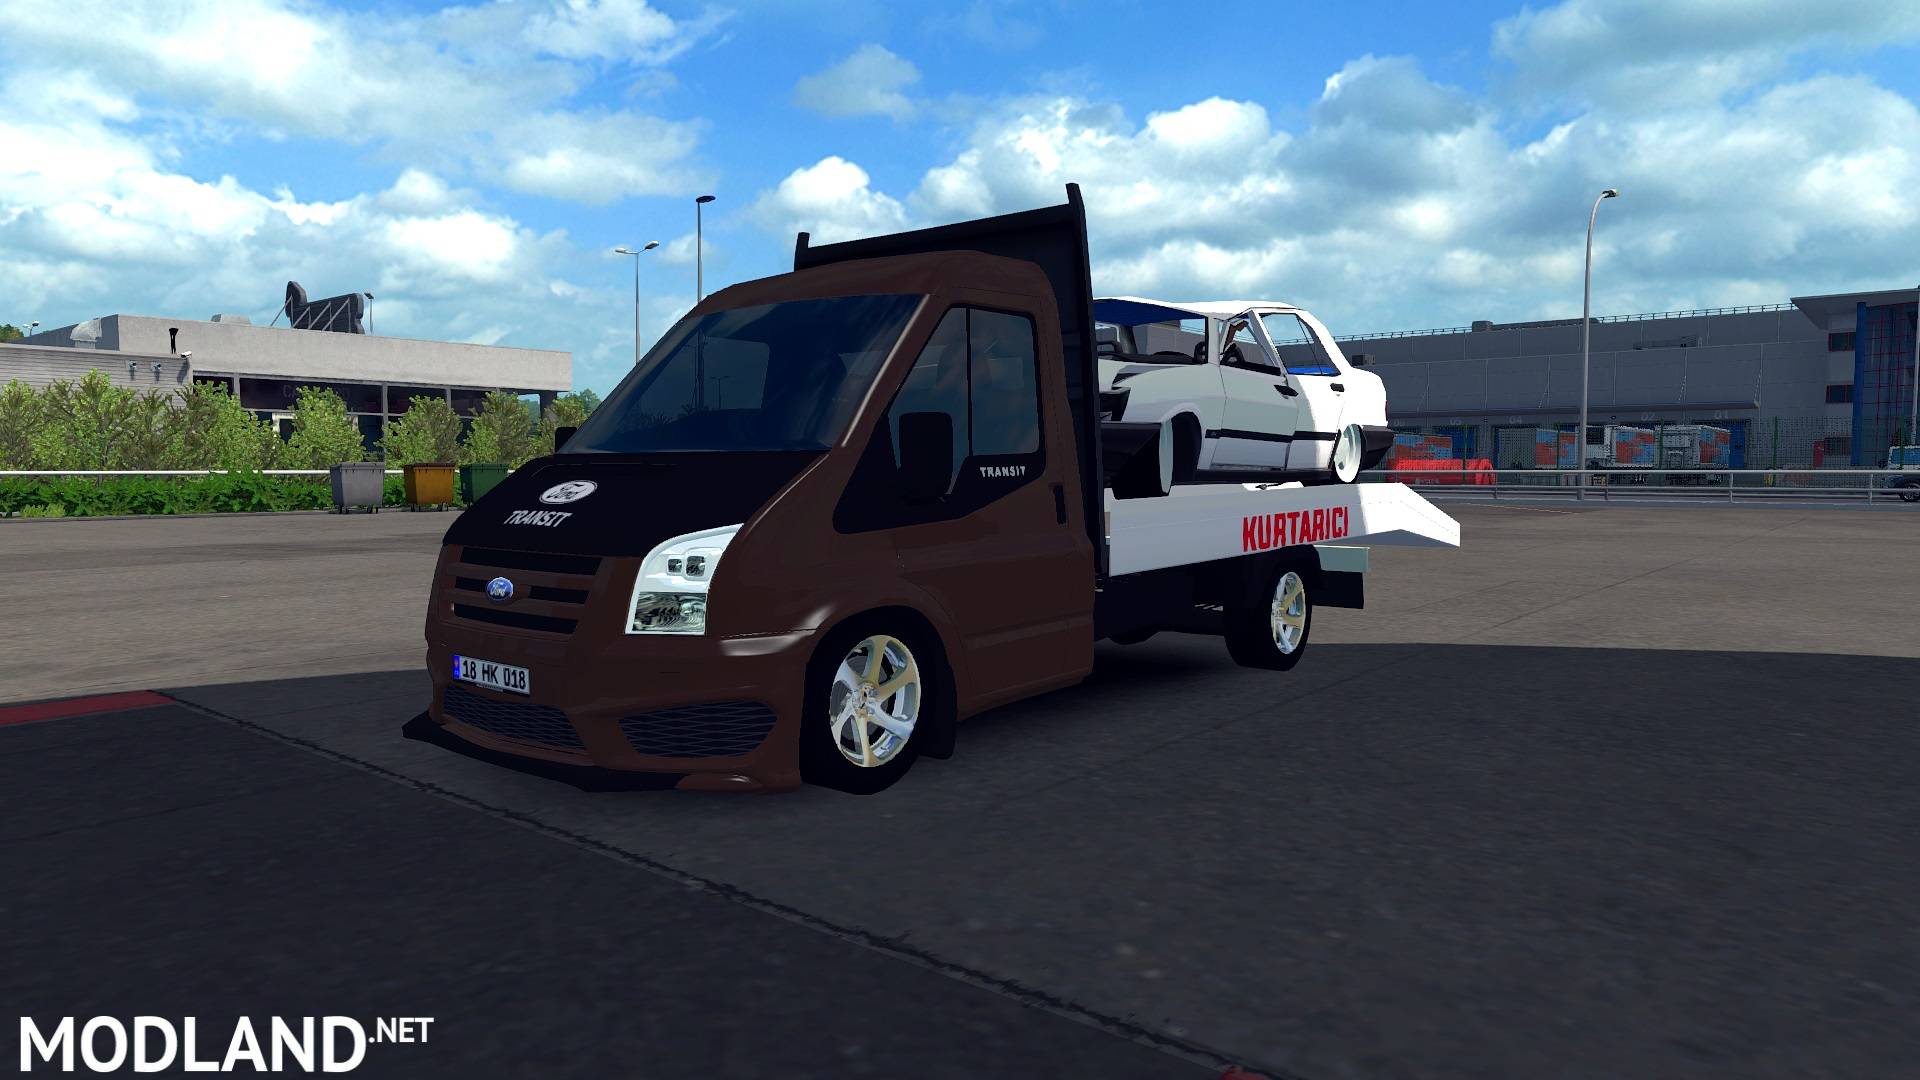 Мод форд транзит. Fs19 Ford Transit. Ford Transit ETS 2. FS 19 фургон Ford Transit. Ford Transit one 2010.